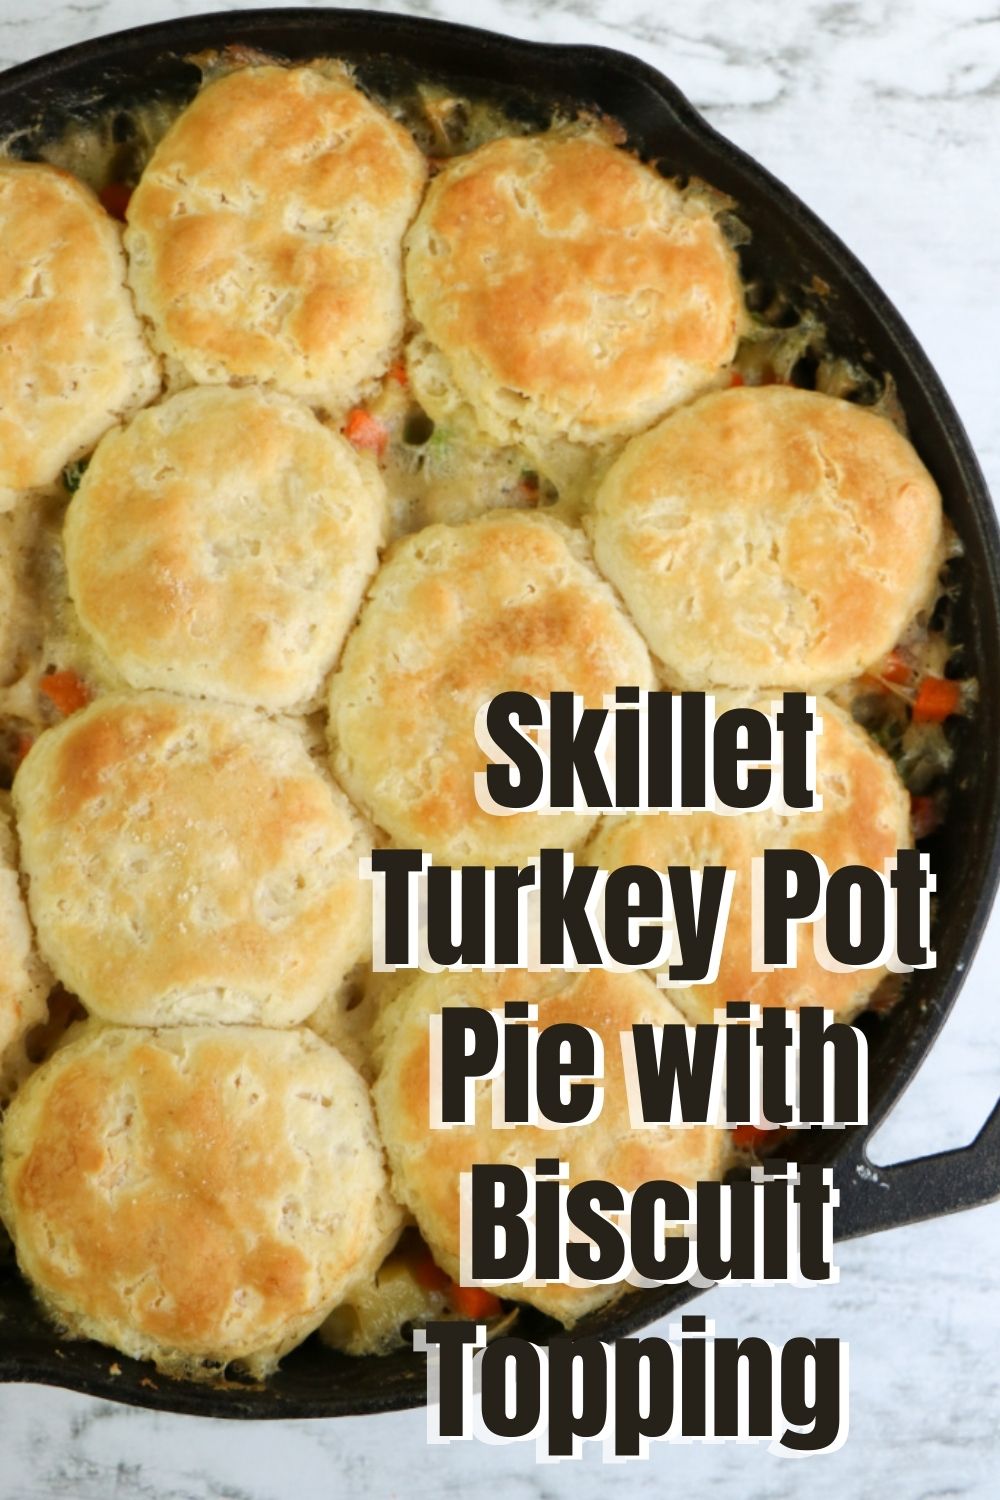 Skillet Turkey Pot Pie with Biscuit Topping Recipe - Thrifty Jinxy